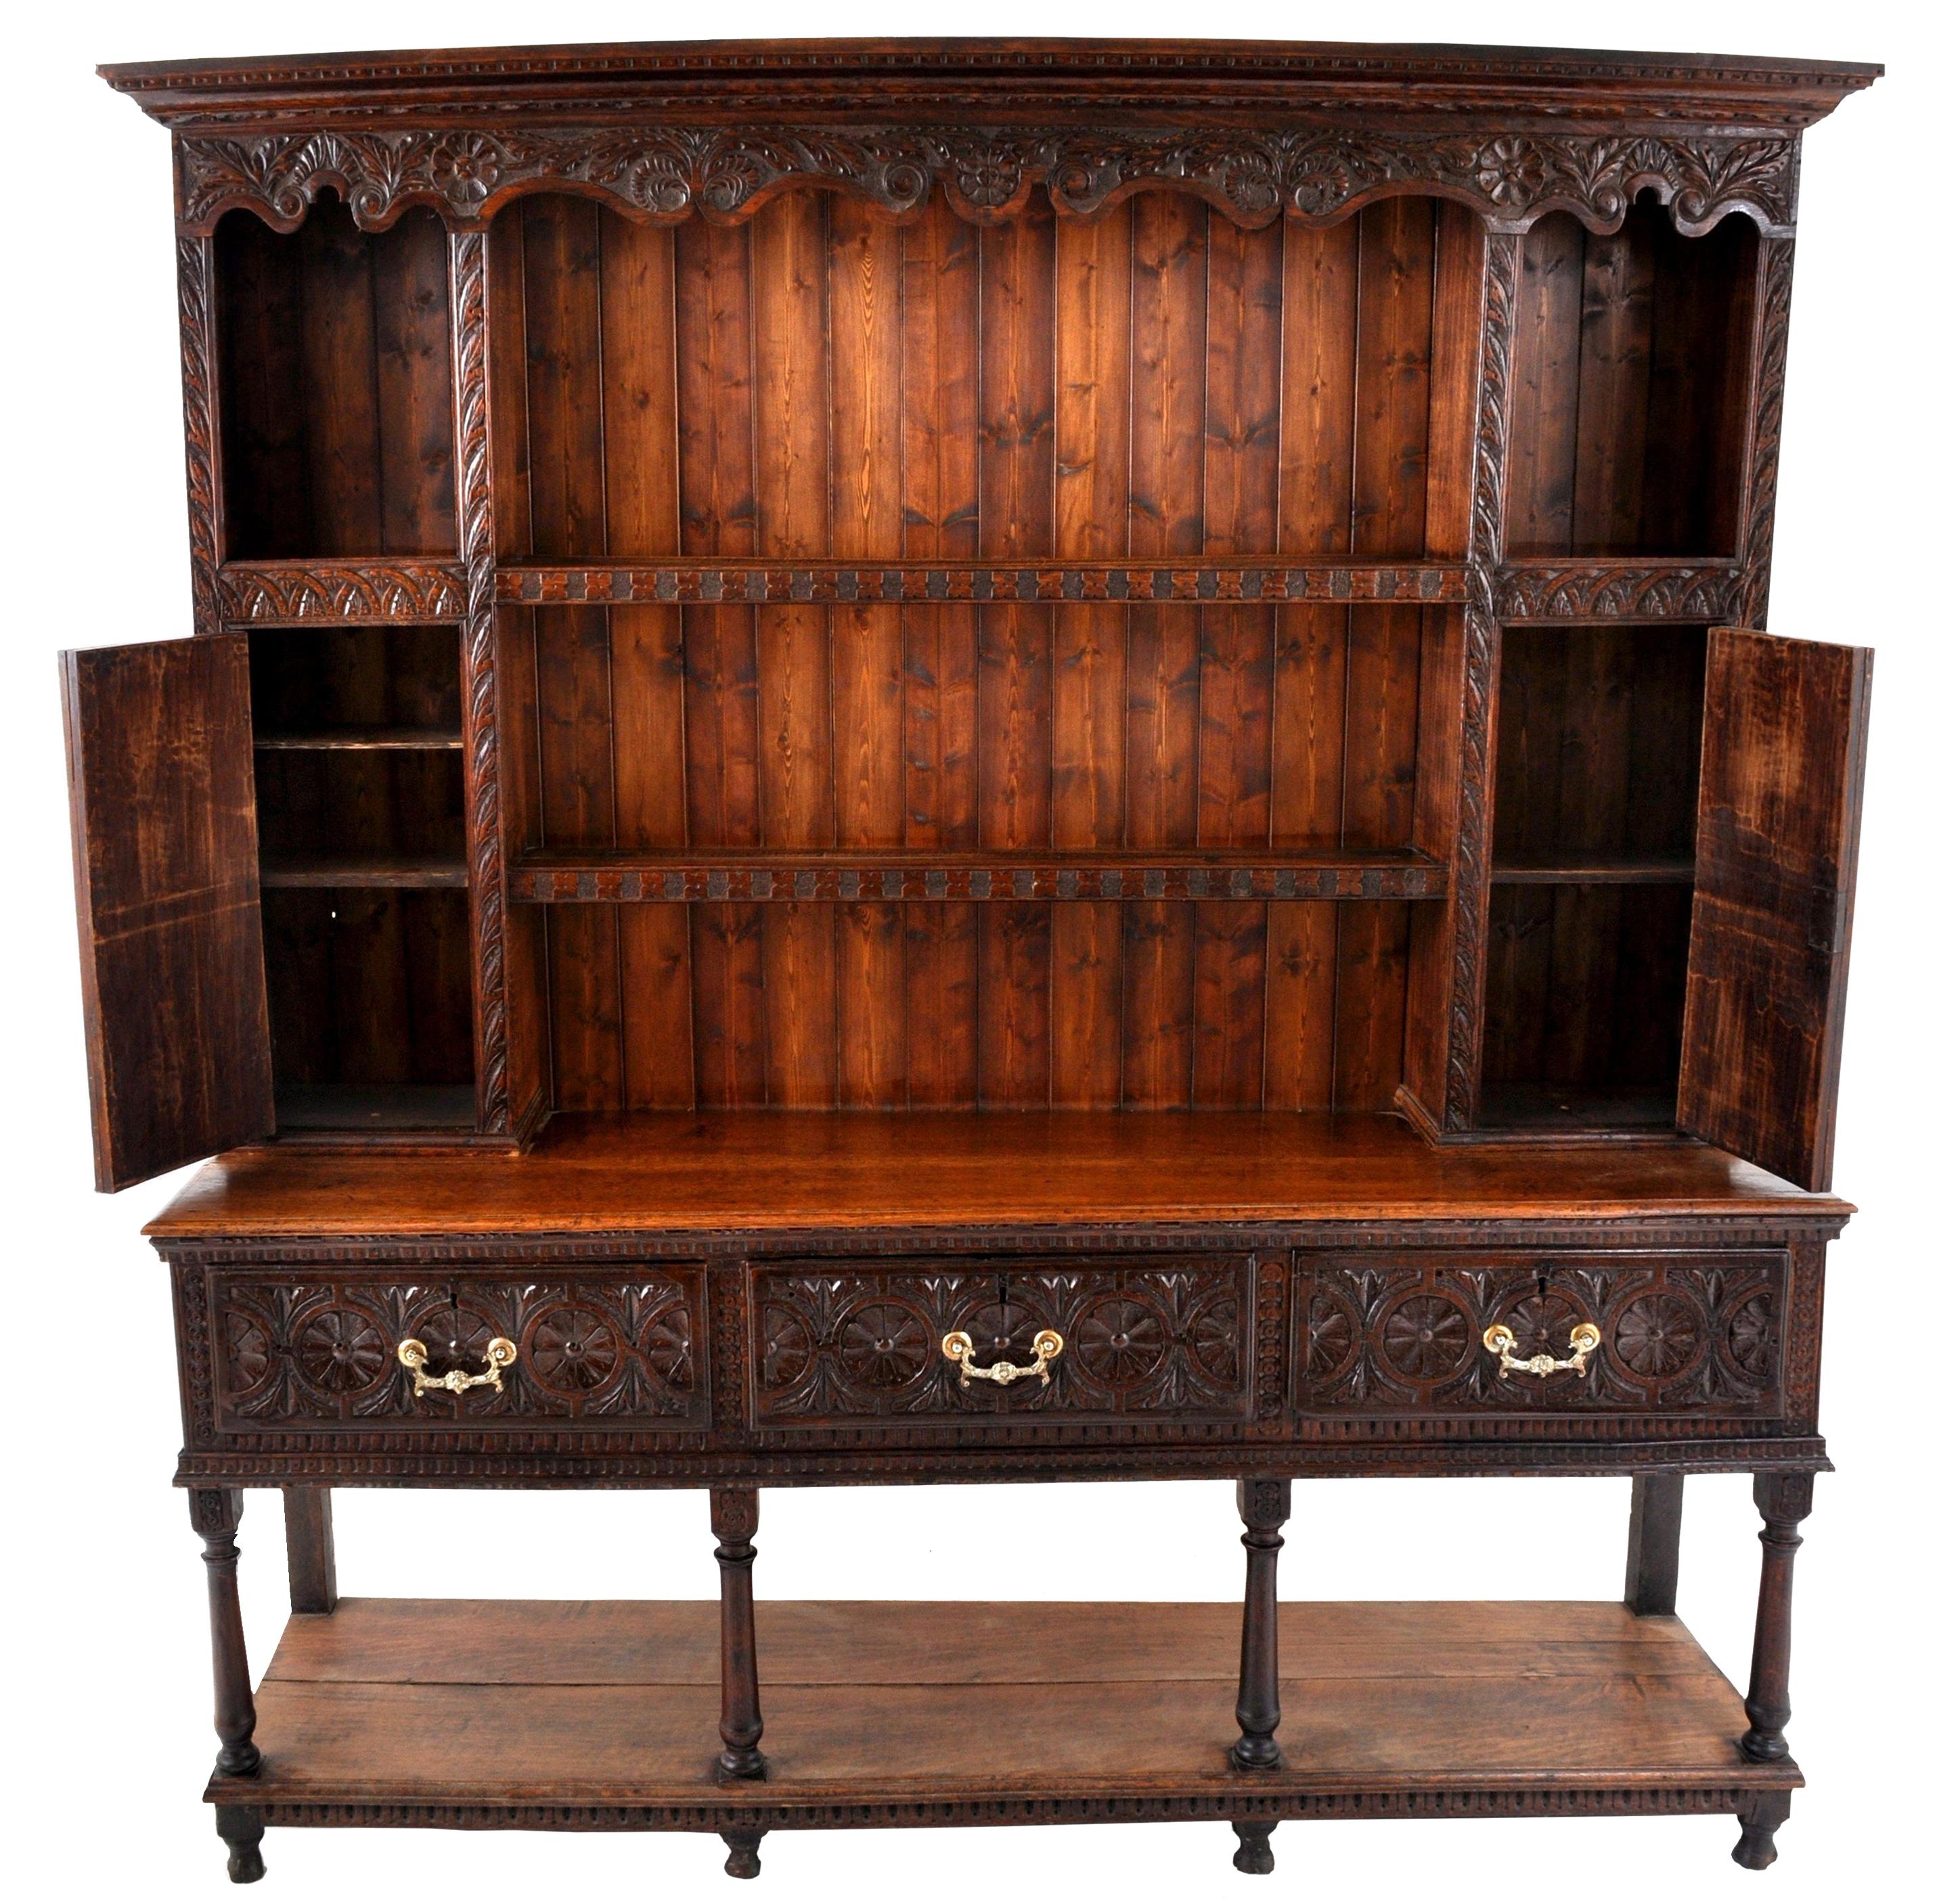 A fine antique Georgian carved oak Welsh dresser/cupboard, circa 1820. To the back is a pot rack with a carved cornice, with a shaped gallery below. The back having carved storage recesses and shelving and two carved cupboard doors with arched